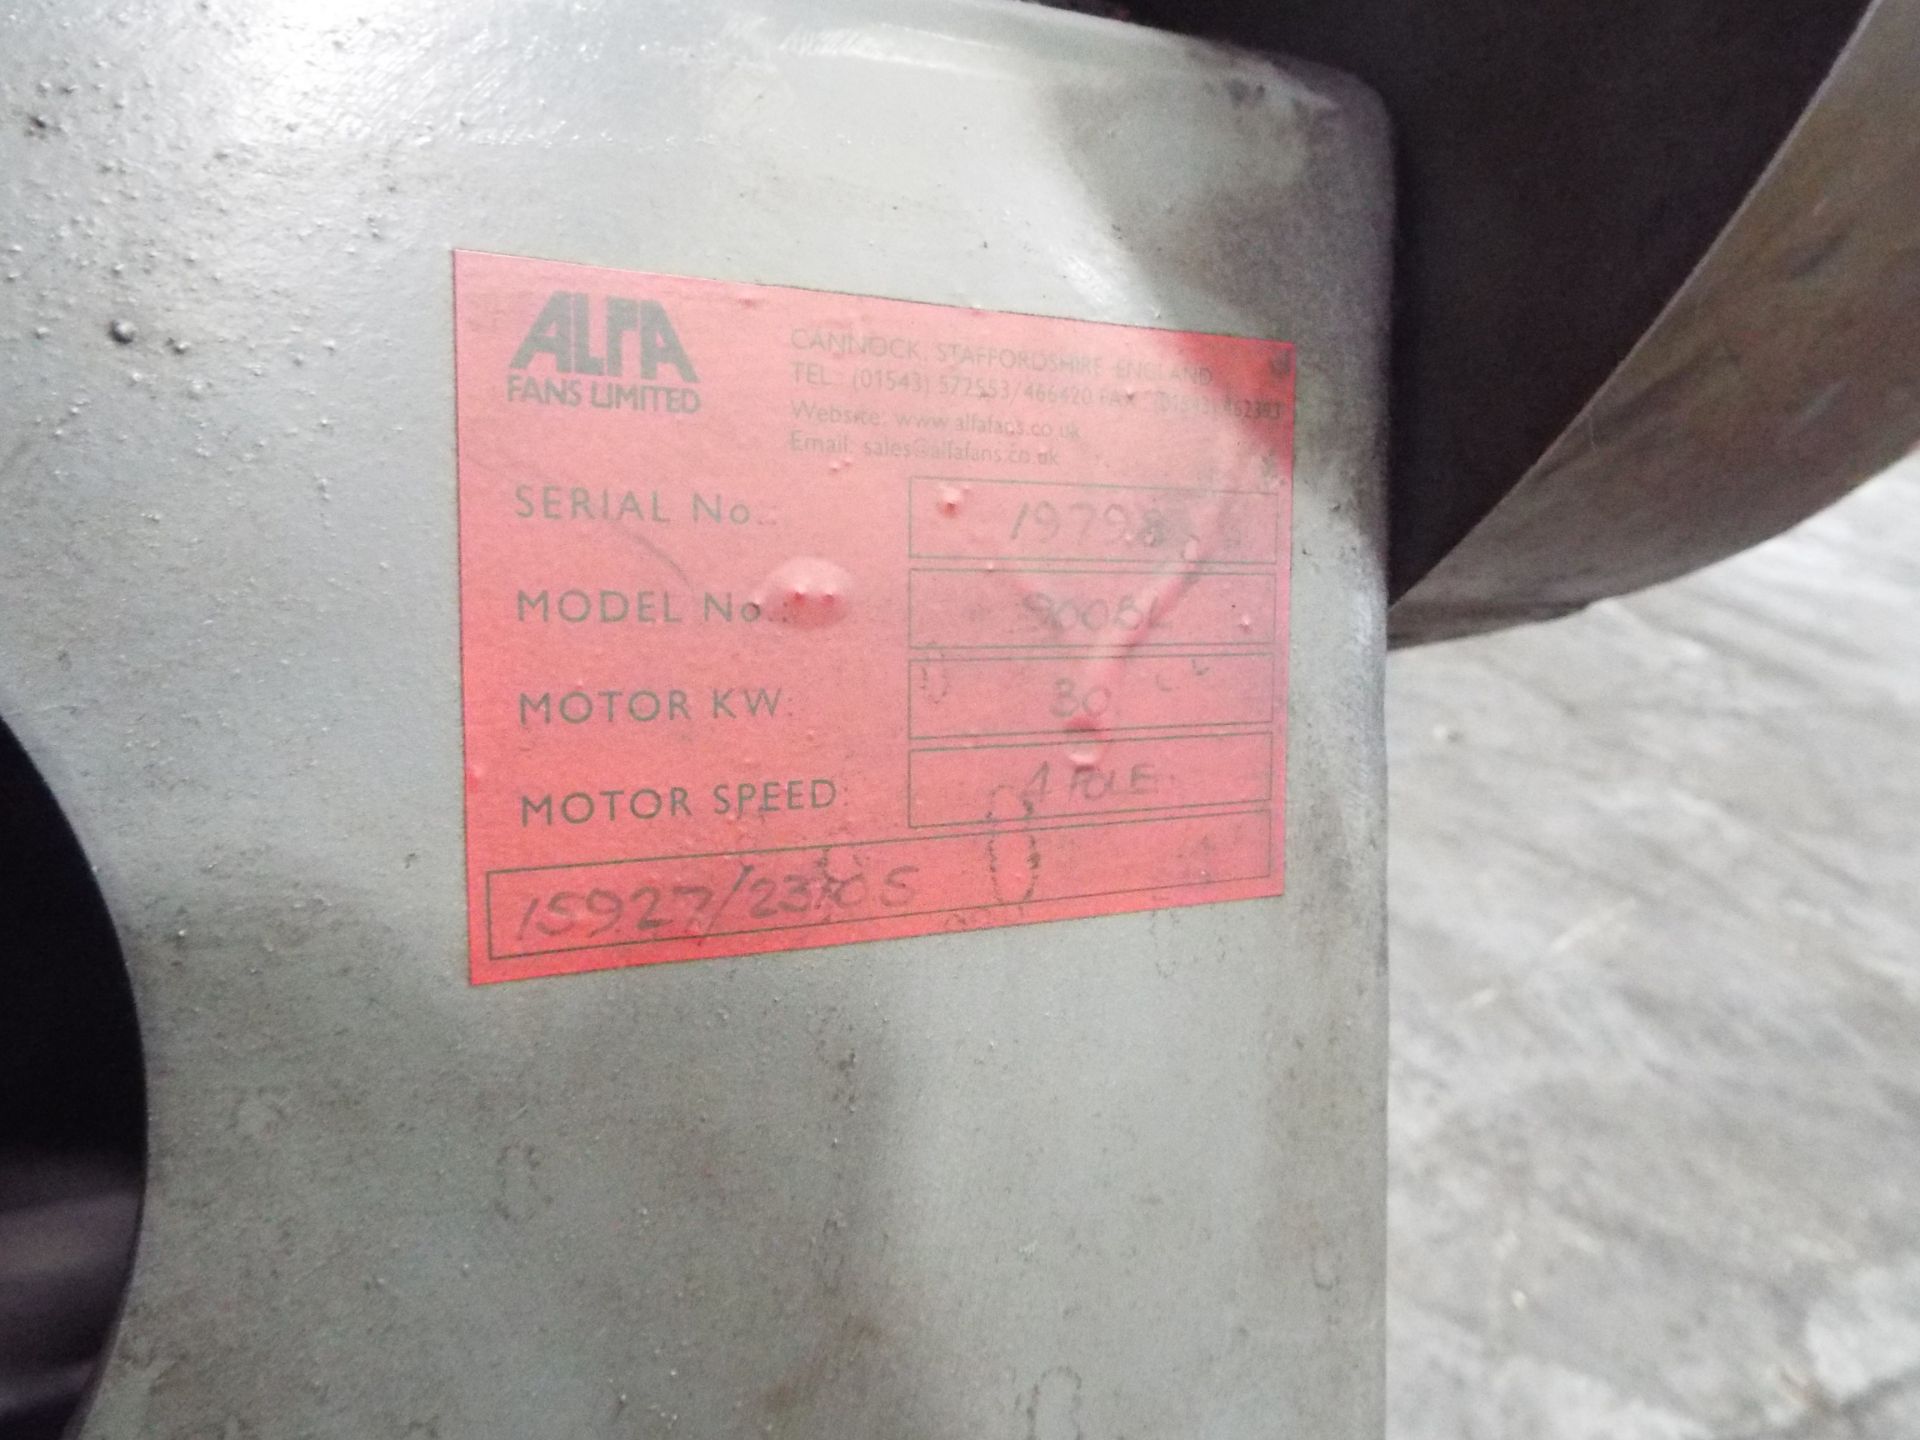 Alfa Fans 30KW Invertor Controlled Localised Exhaust Ventilation Unit - Image 5 of 12